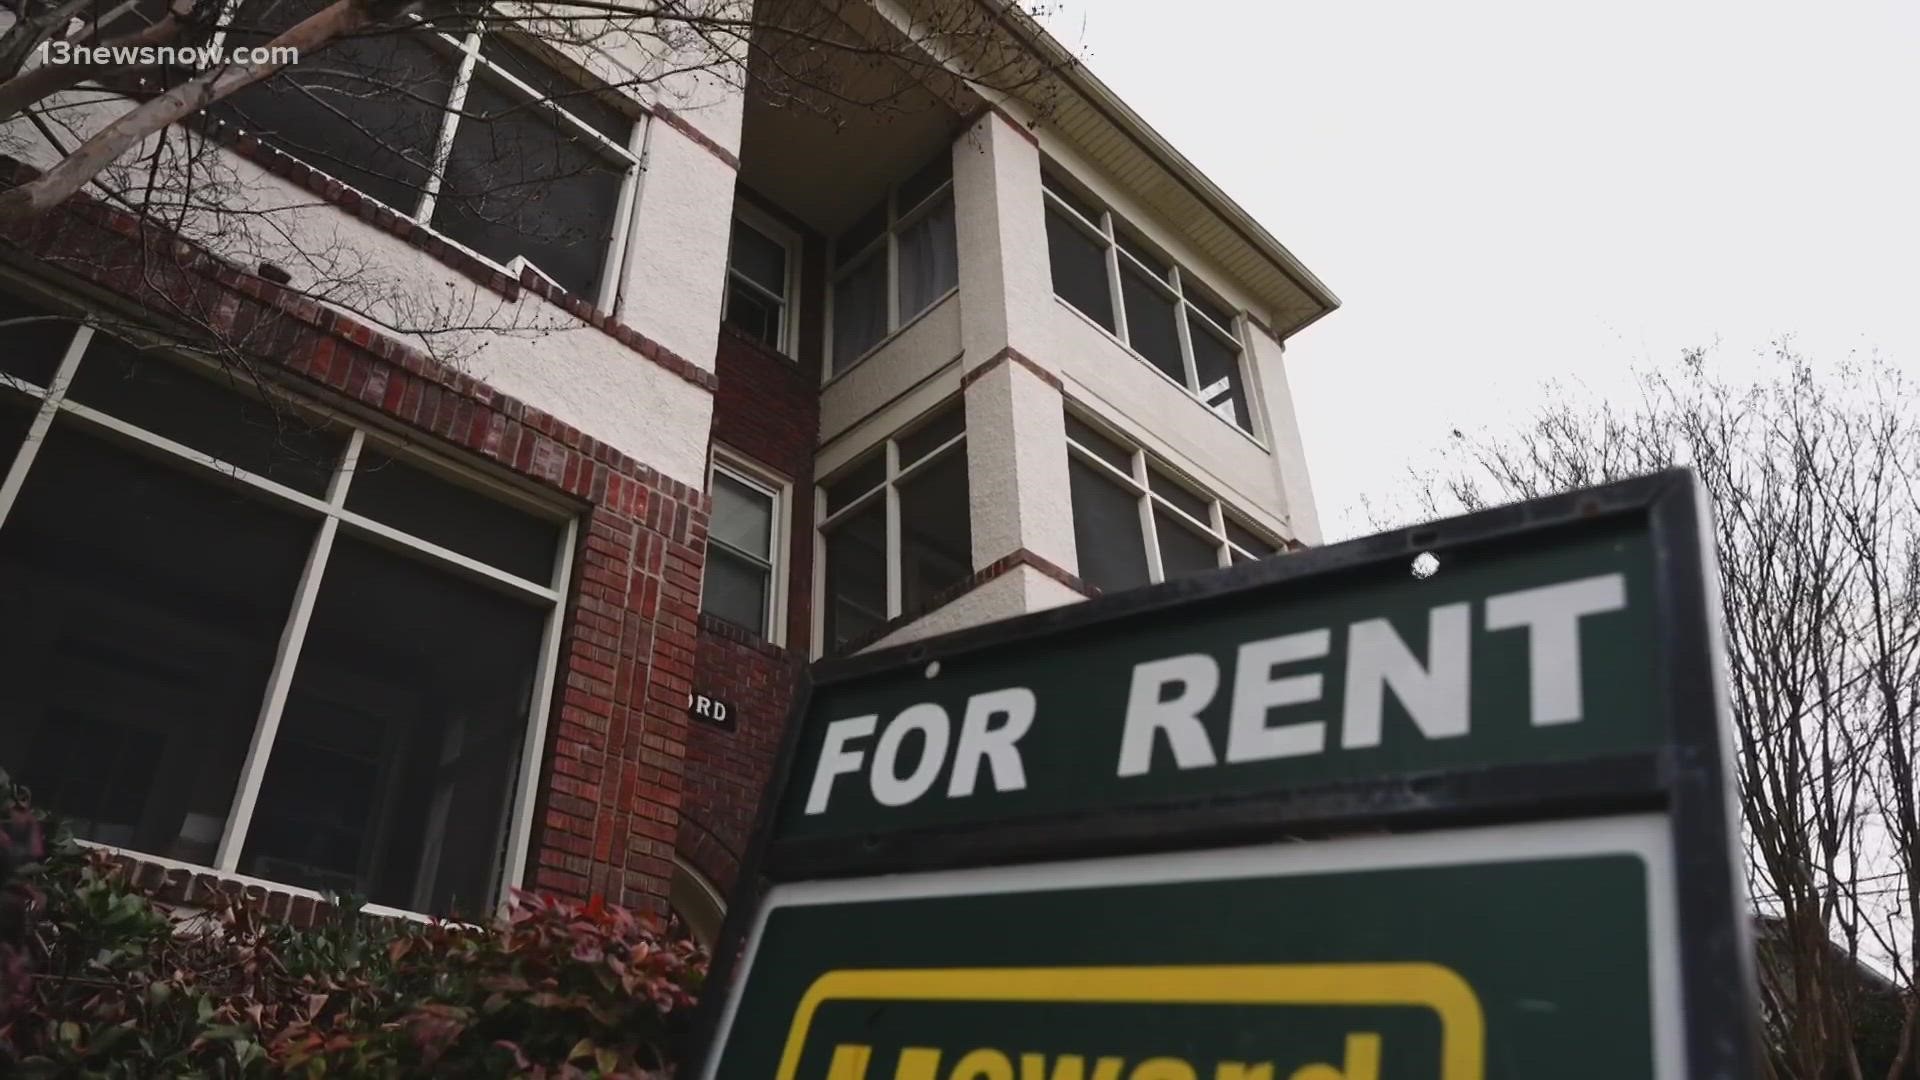 The average rent increase in 2022 was 14%, and according to U.S. Census Bureau data, Virginia ranked 5th highest for one-bedroom rent increases across the country.